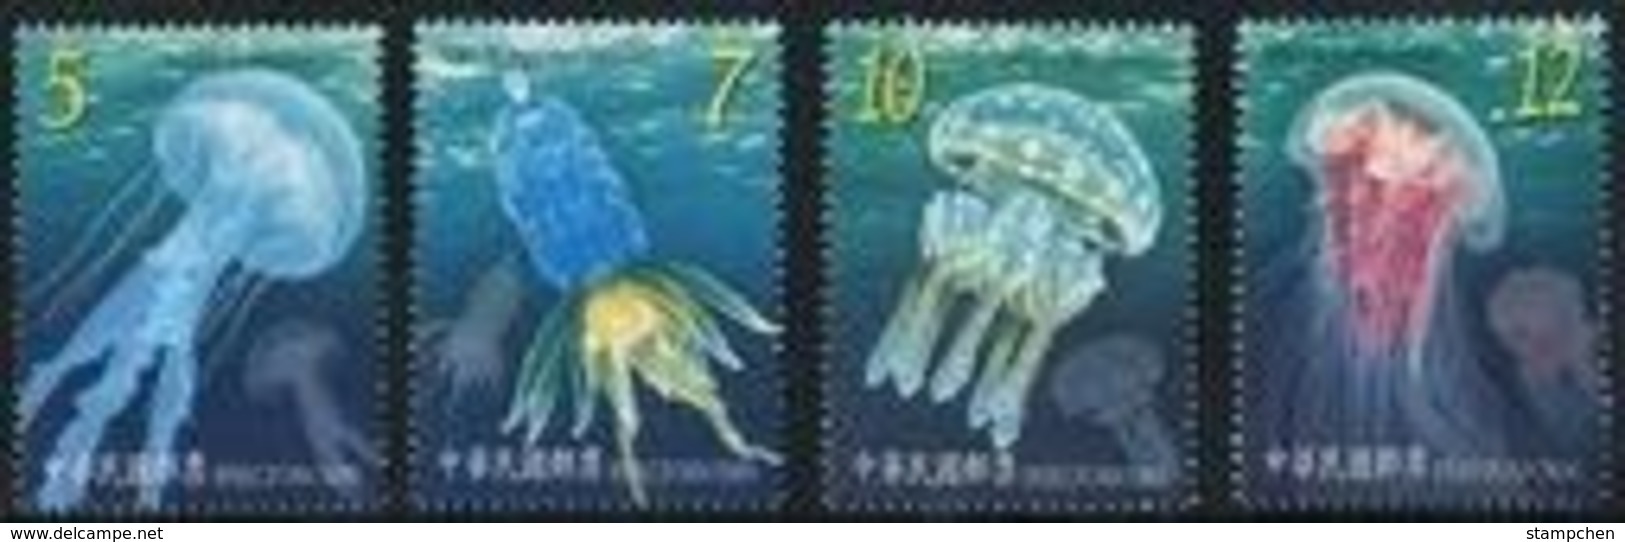 2015 Marine Life- Jellyfish Stamps Sea Jelly Fish Fluorescent Ink Unusual - Unused Stamps